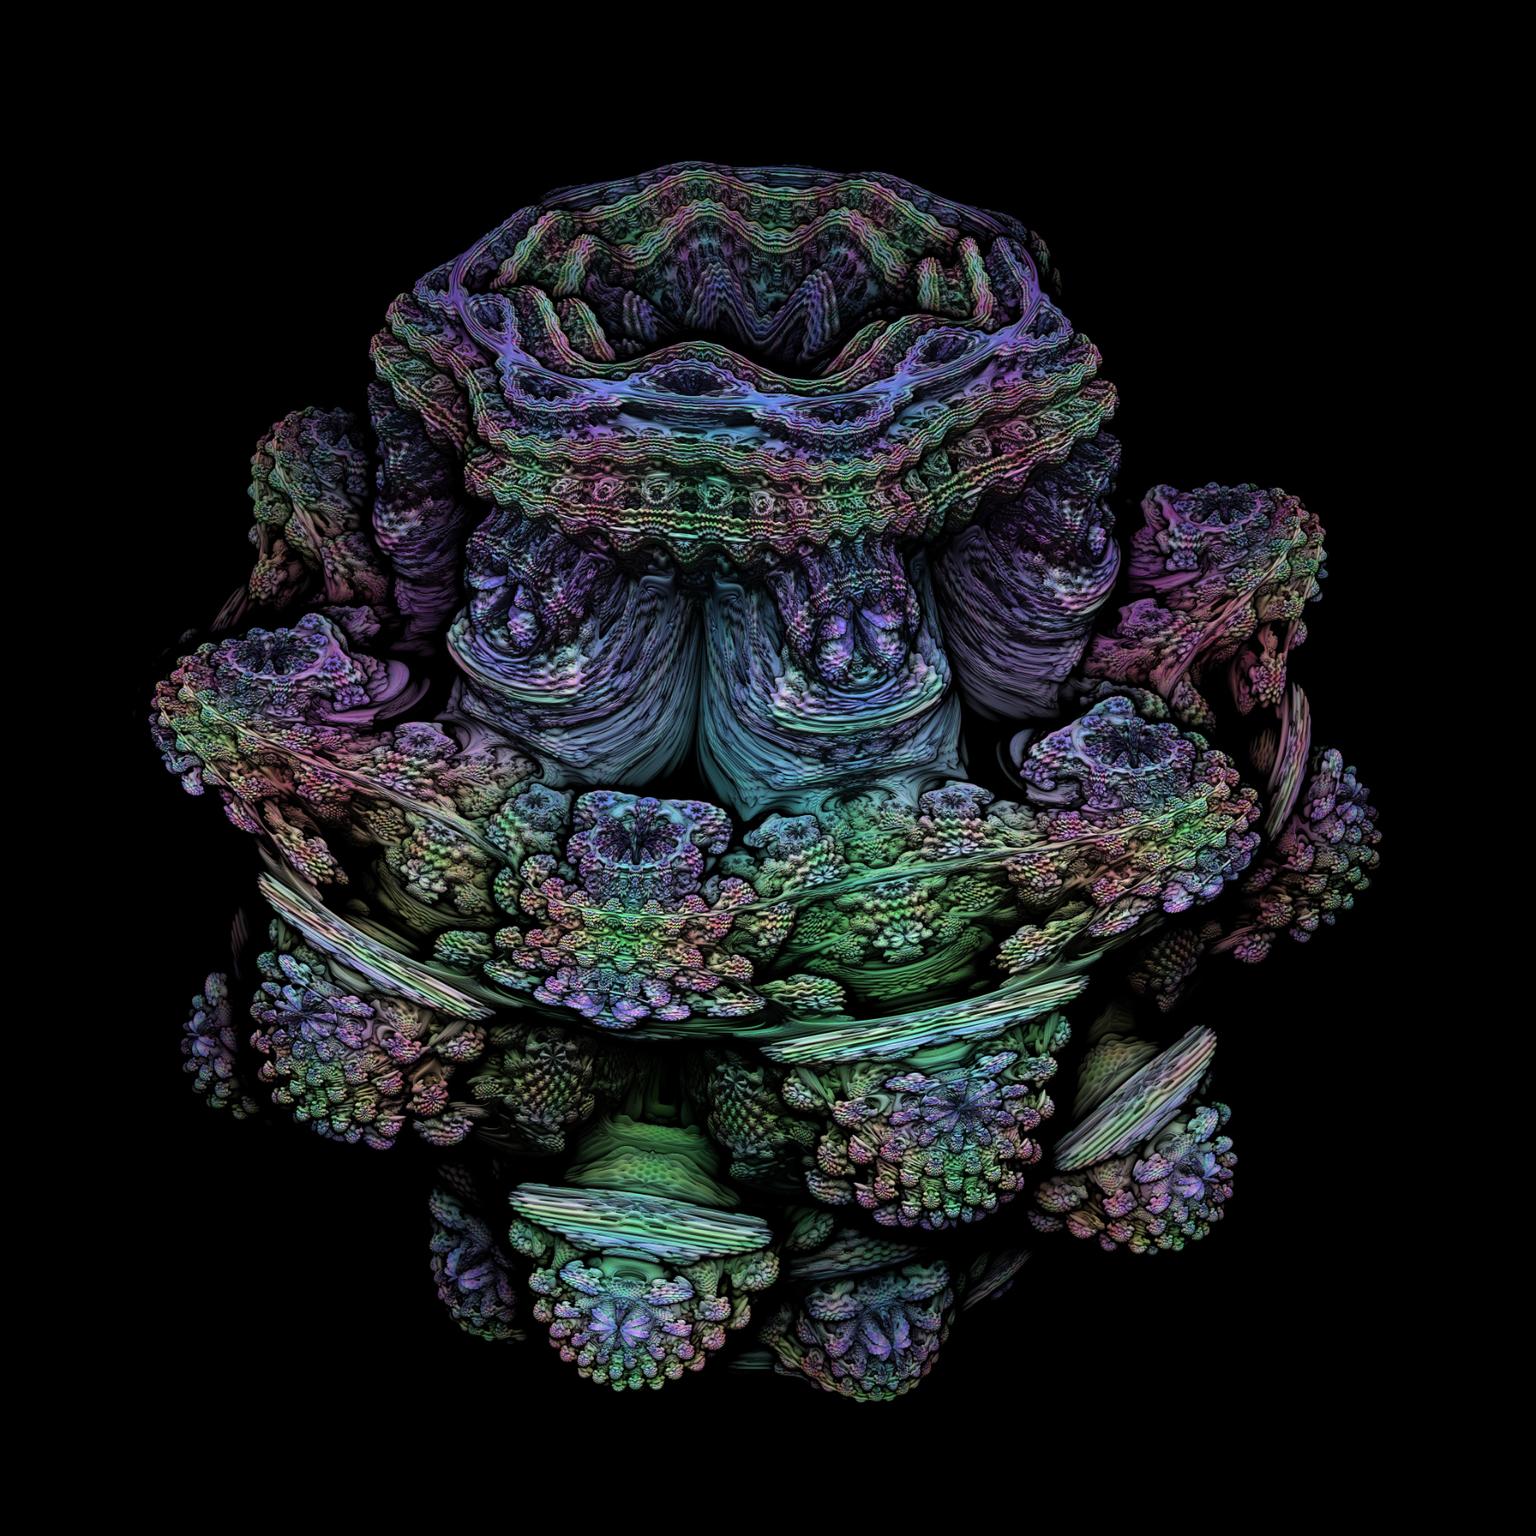 Image for entry 'The Mandelbulb'